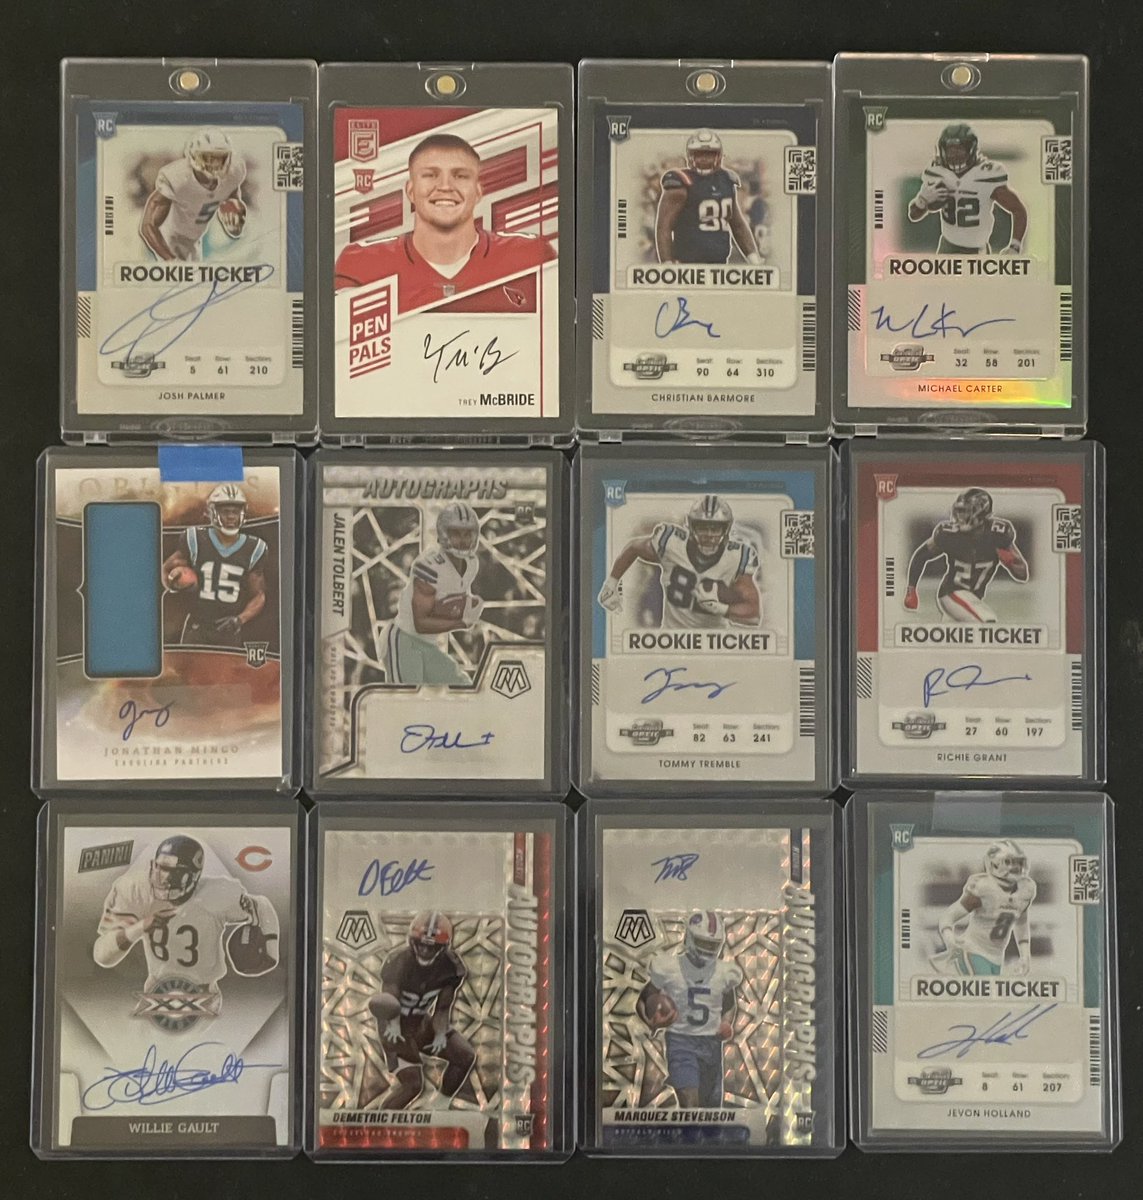 Anyone want a deal on some football autos? RTs and likes appreciated! @TheHobby247 @ToCollecting